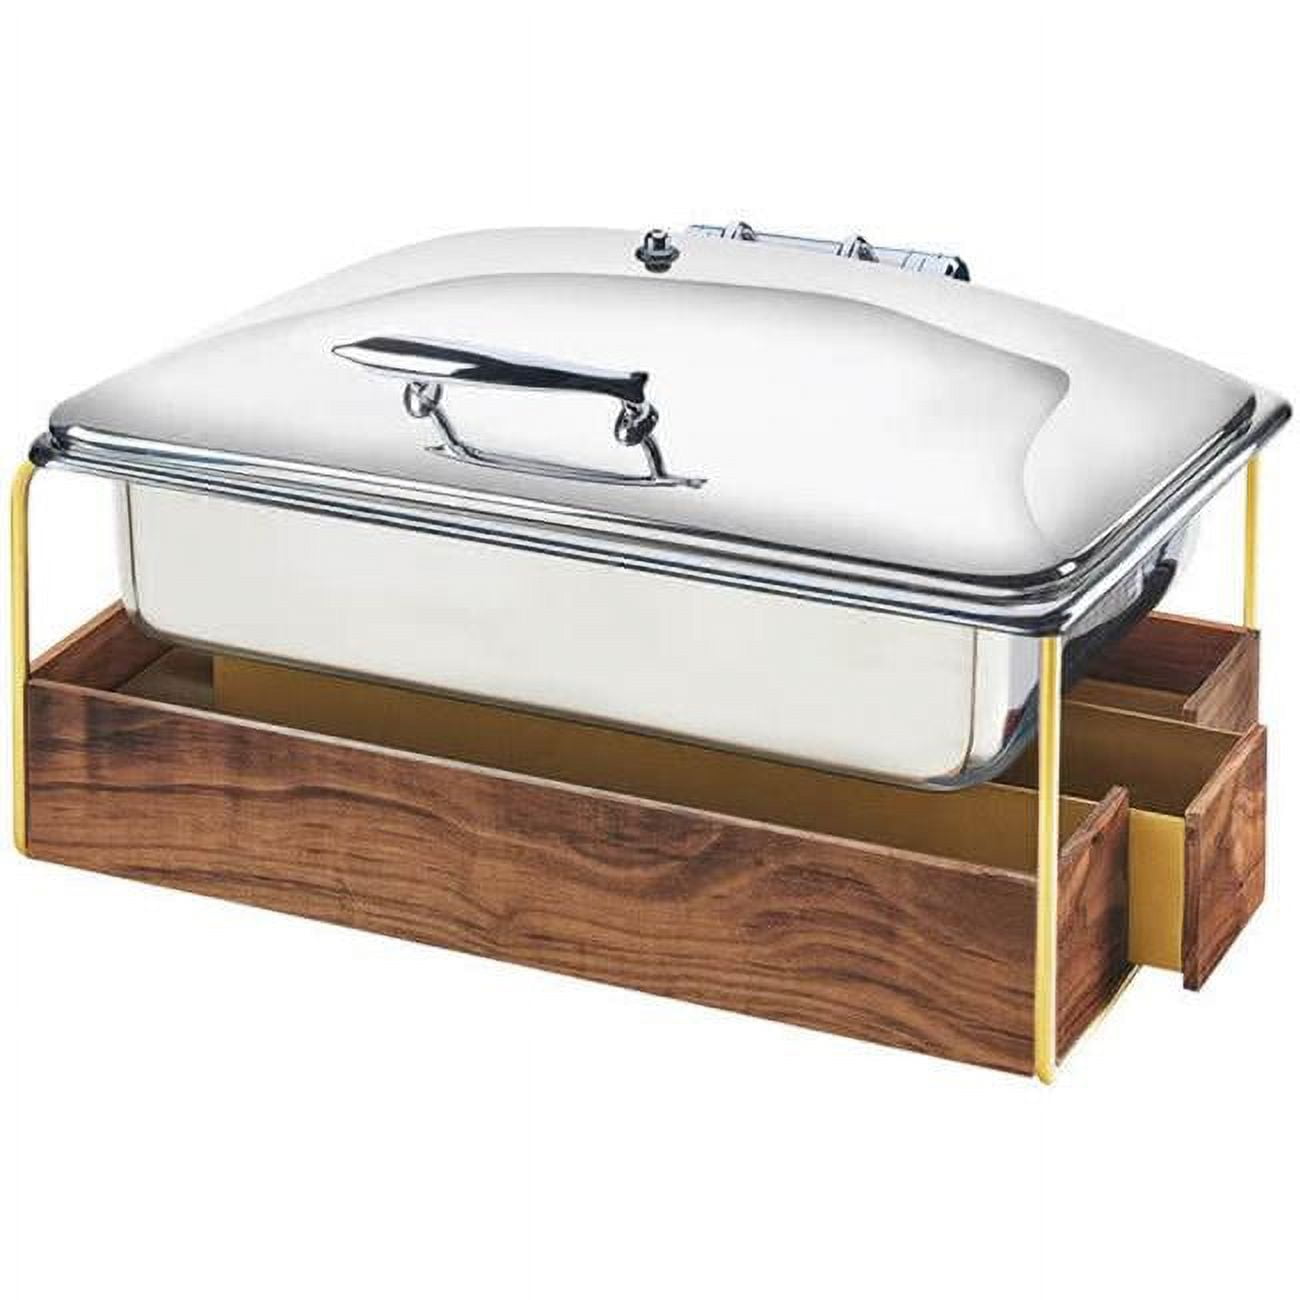 3705-46 12 x 20 in. Chafer with Lid - Brass - Silver